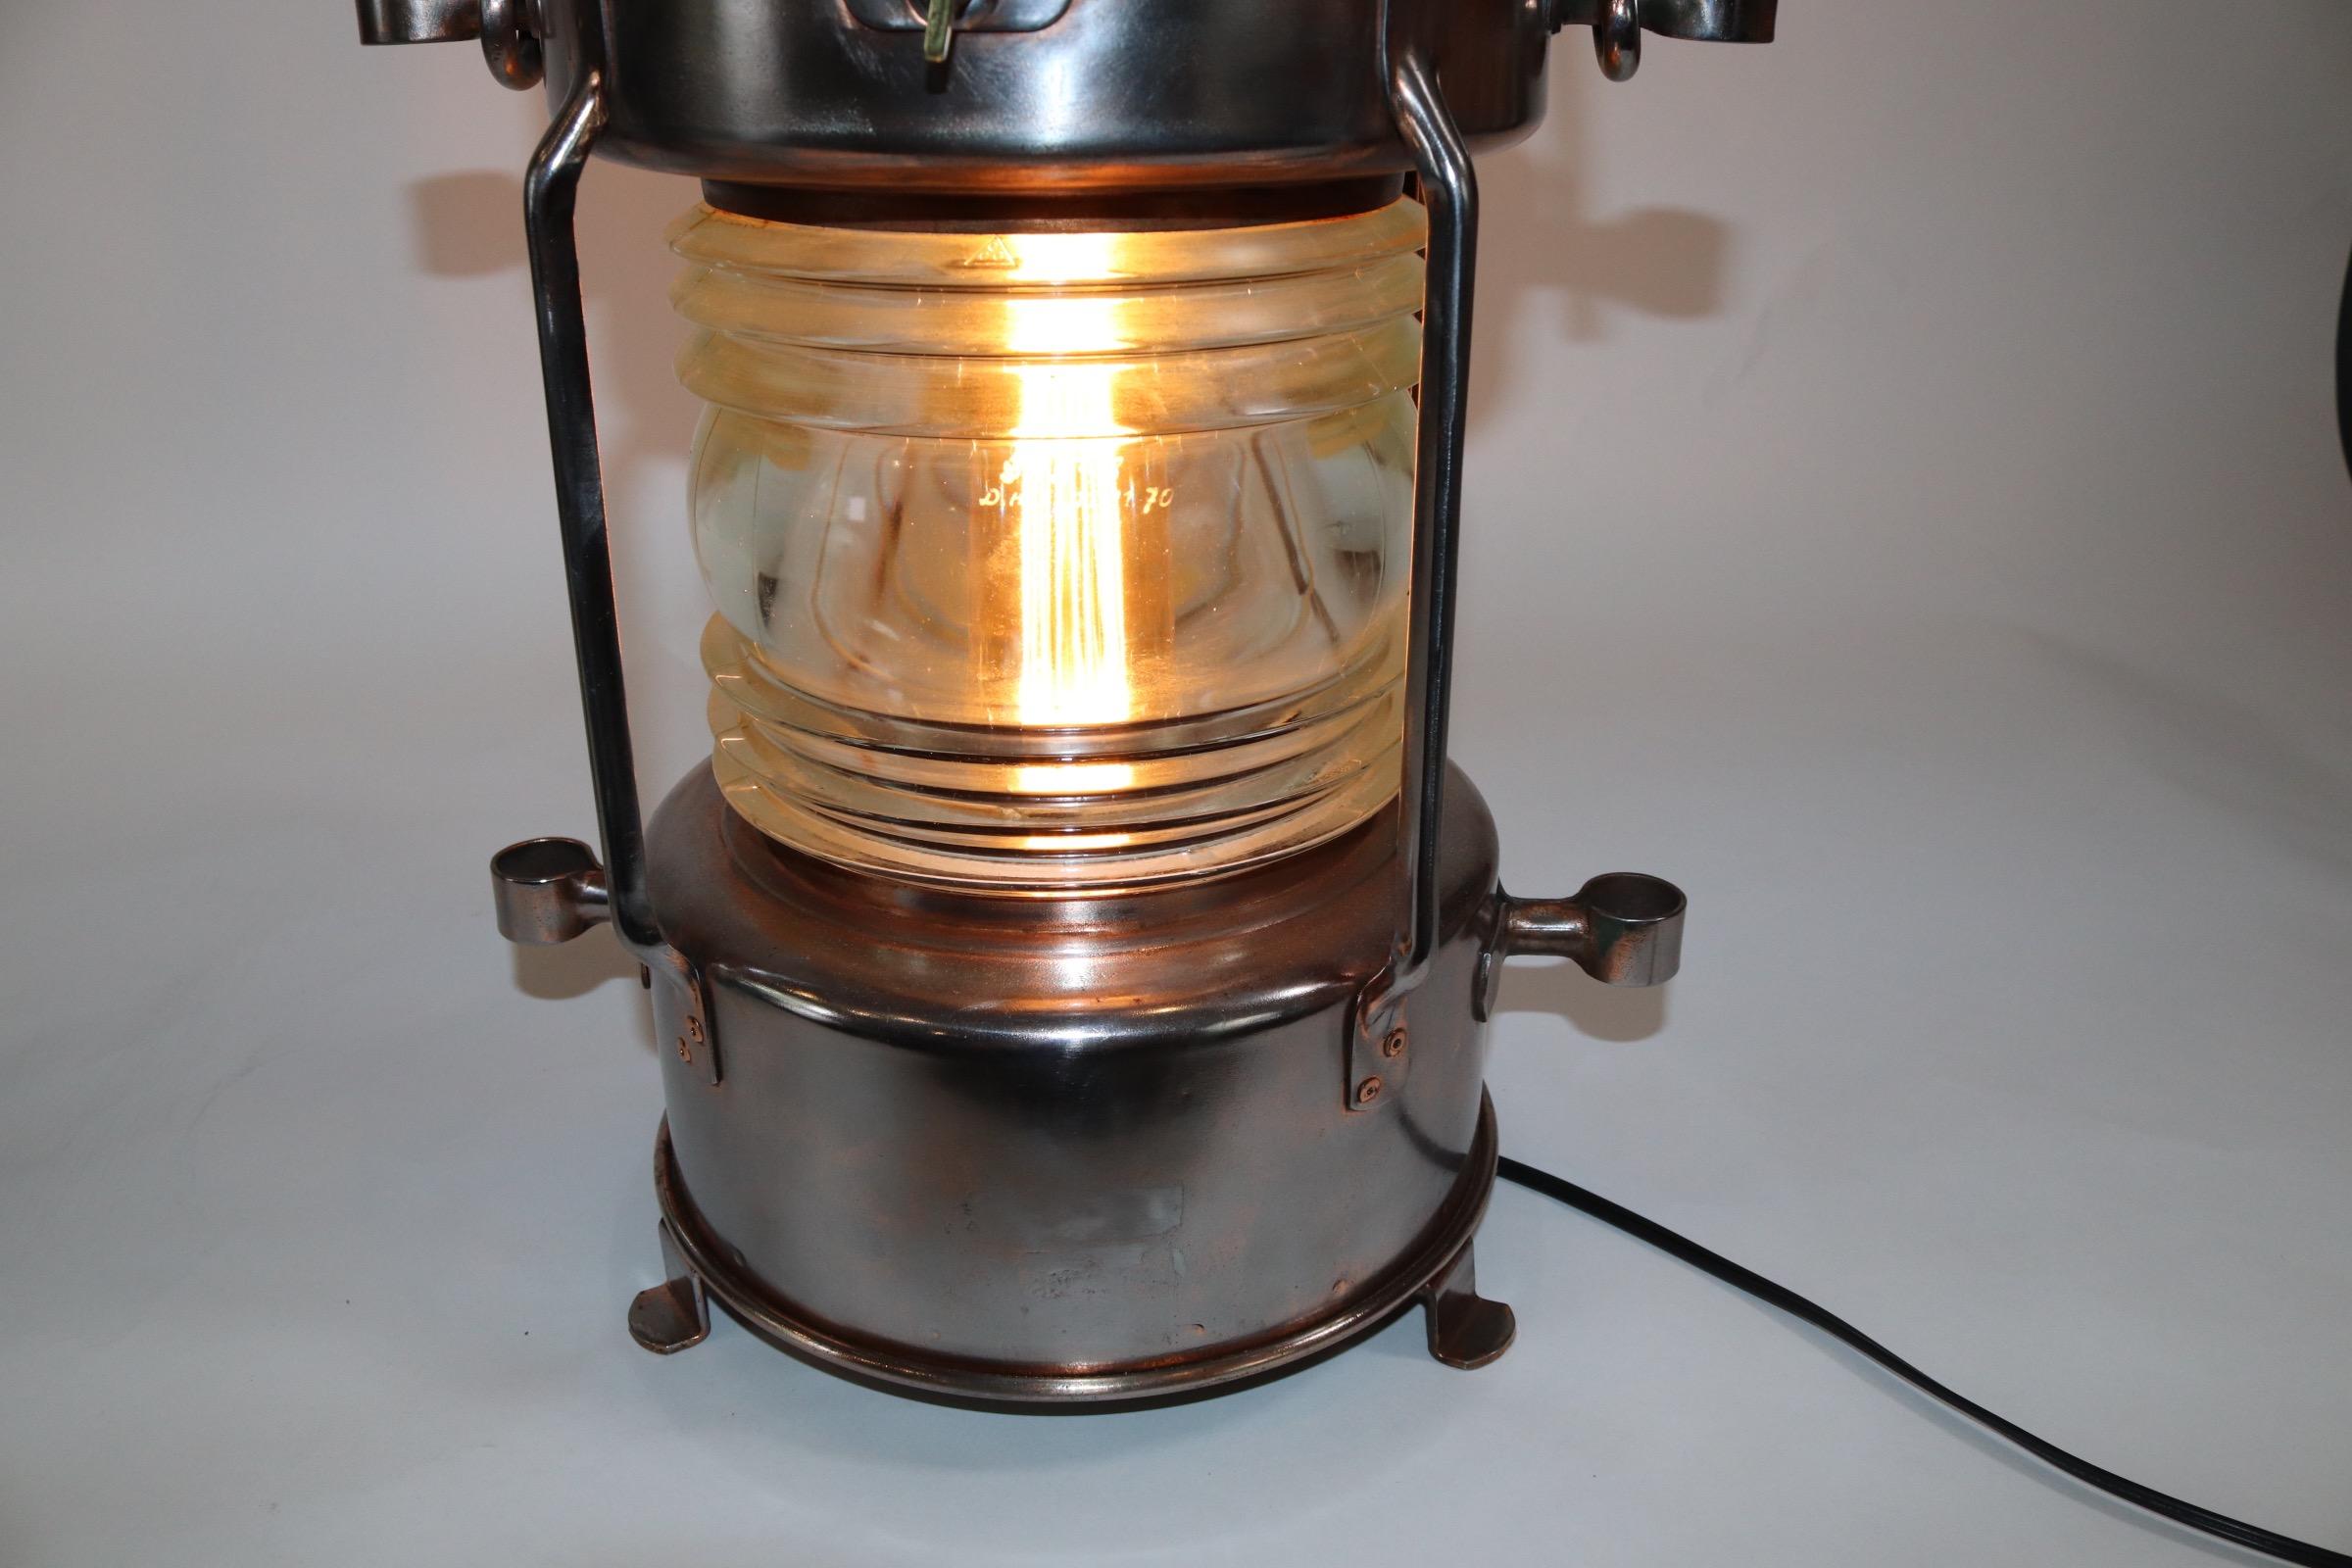 Polished steel ships anchor lantern with copper cap, carry handle, glass Fresnel lens, and the lantern is electrified for home use. Weight is 13 pounds.